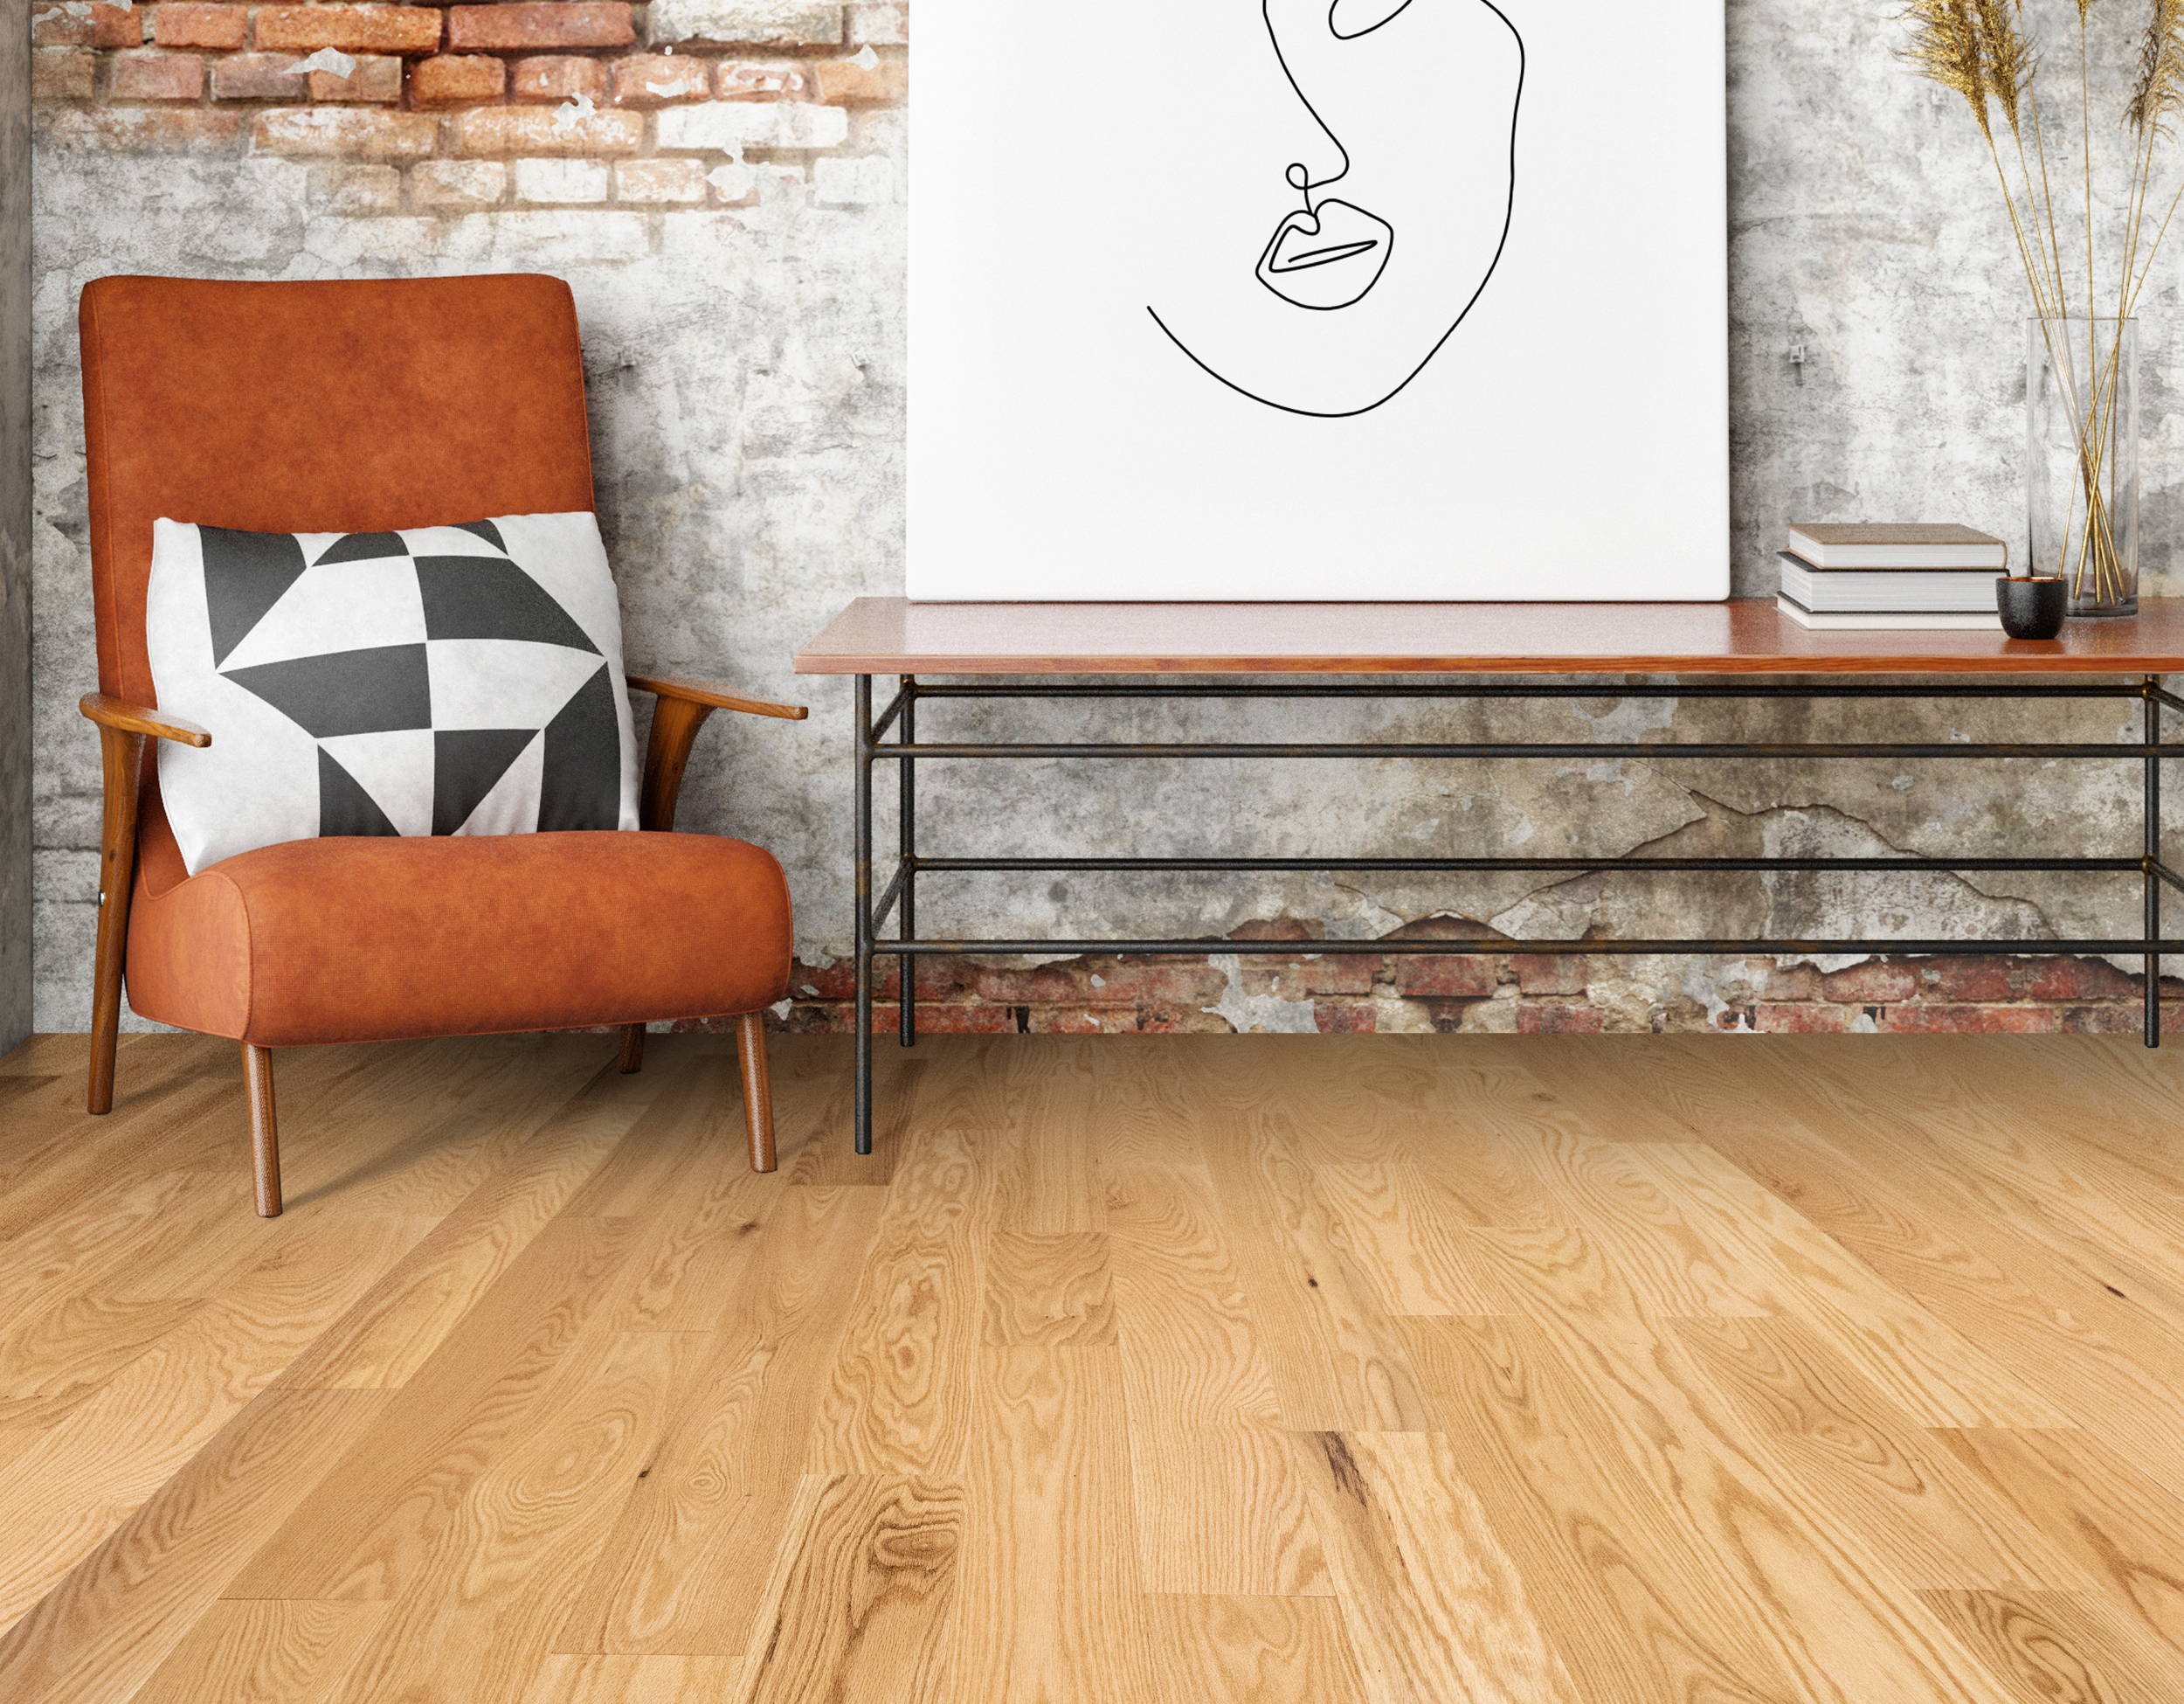 How To Mix Different Tones of Wood Like a Professional